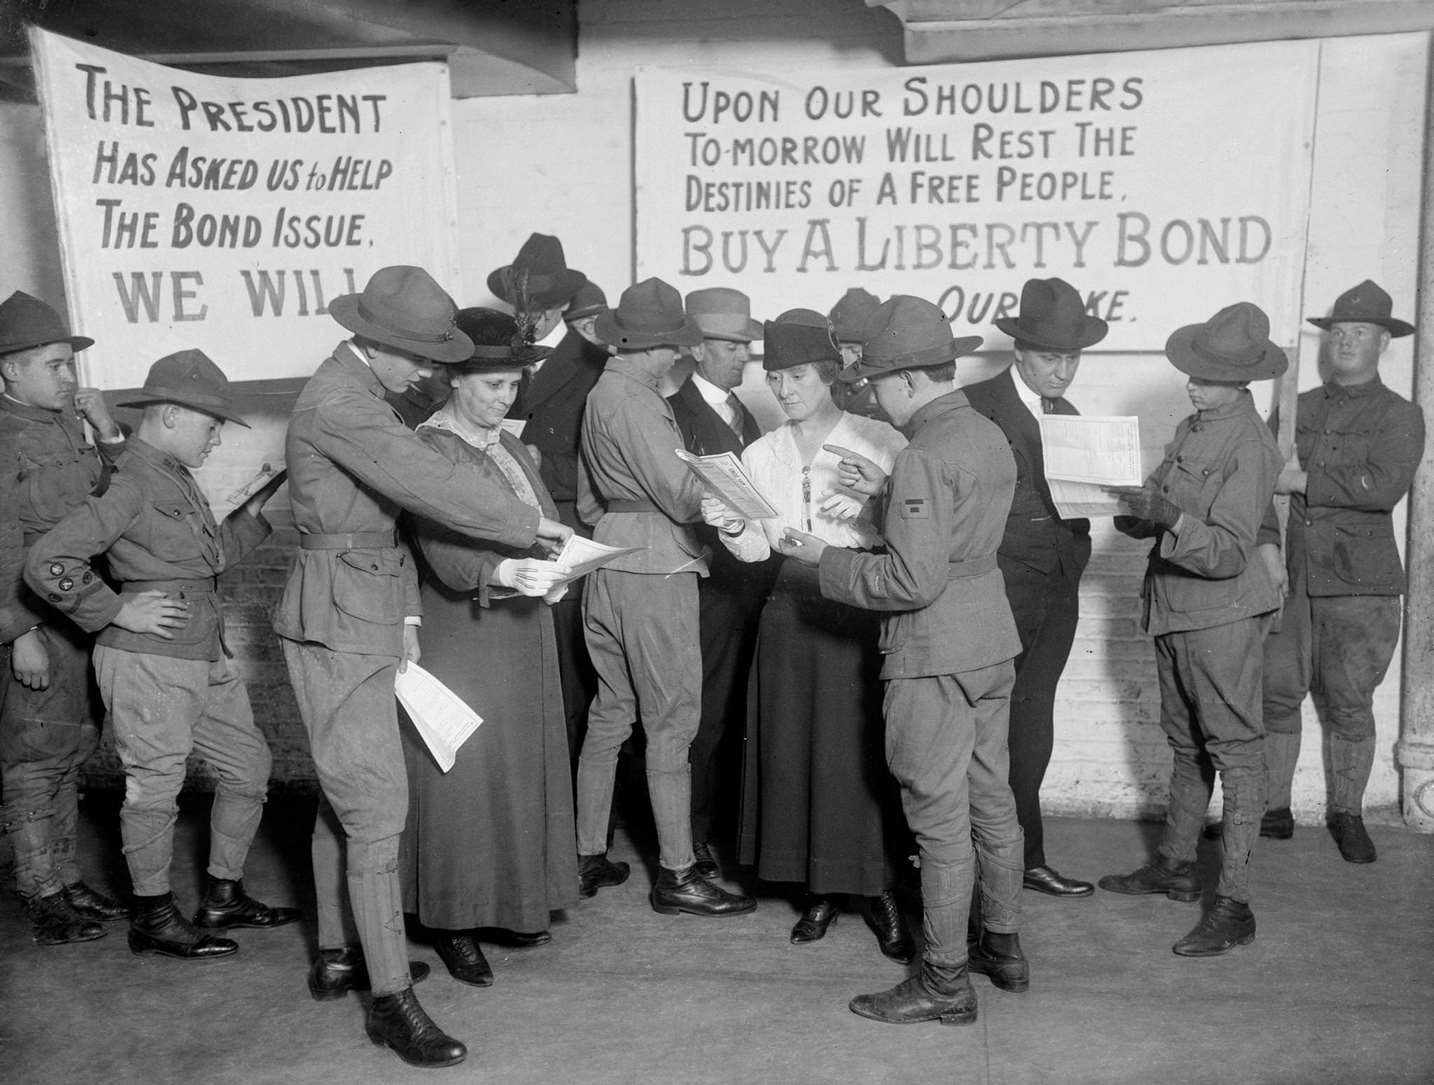 Boy scouts wearing U.S. Army uniforms sell Liberty Bonds to several men and women in a room in Chicago, Illinois, 1917.